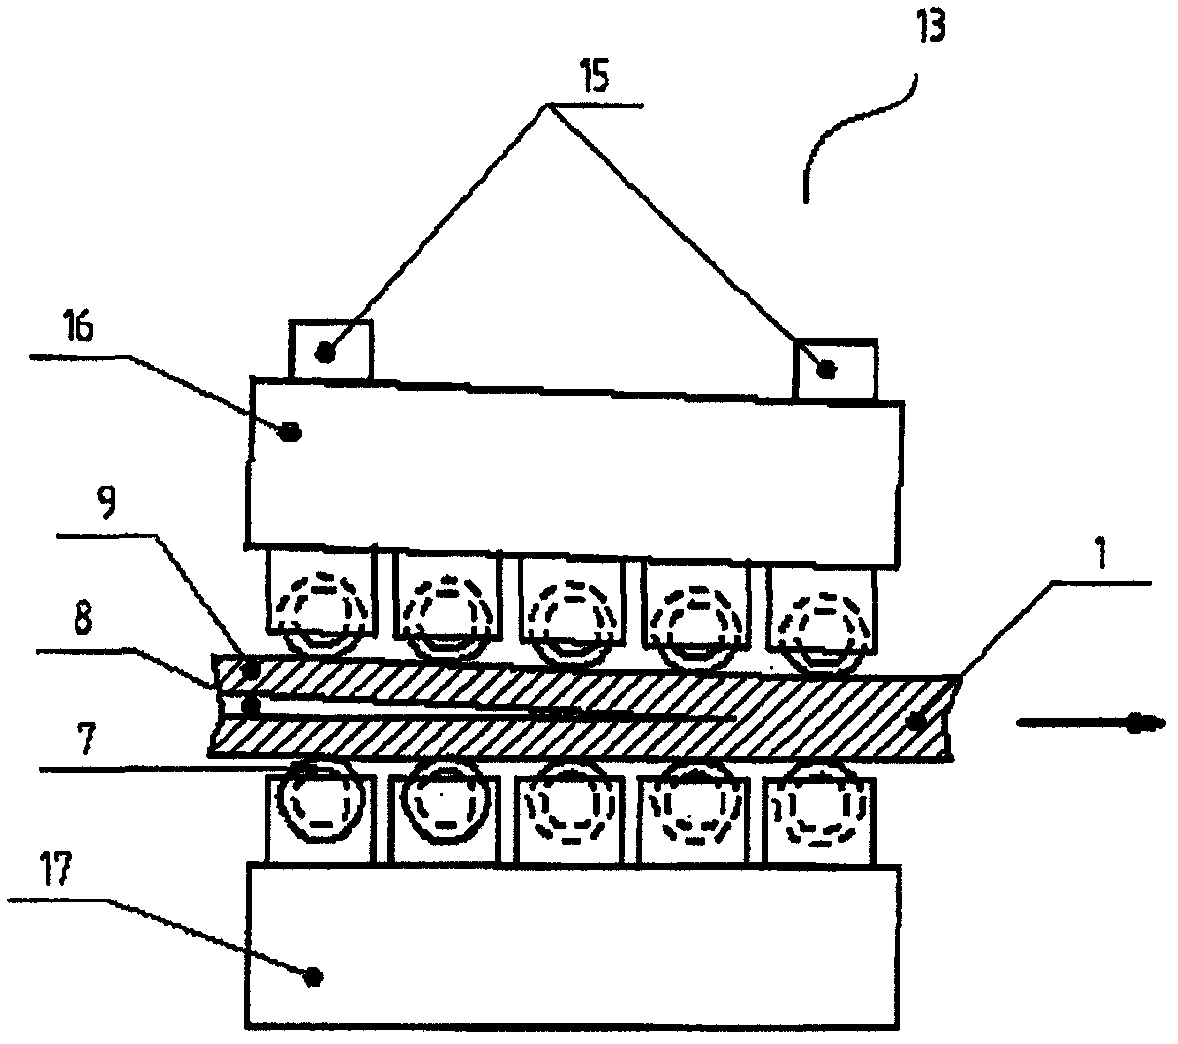 Method for the continuous casting of a metal strand